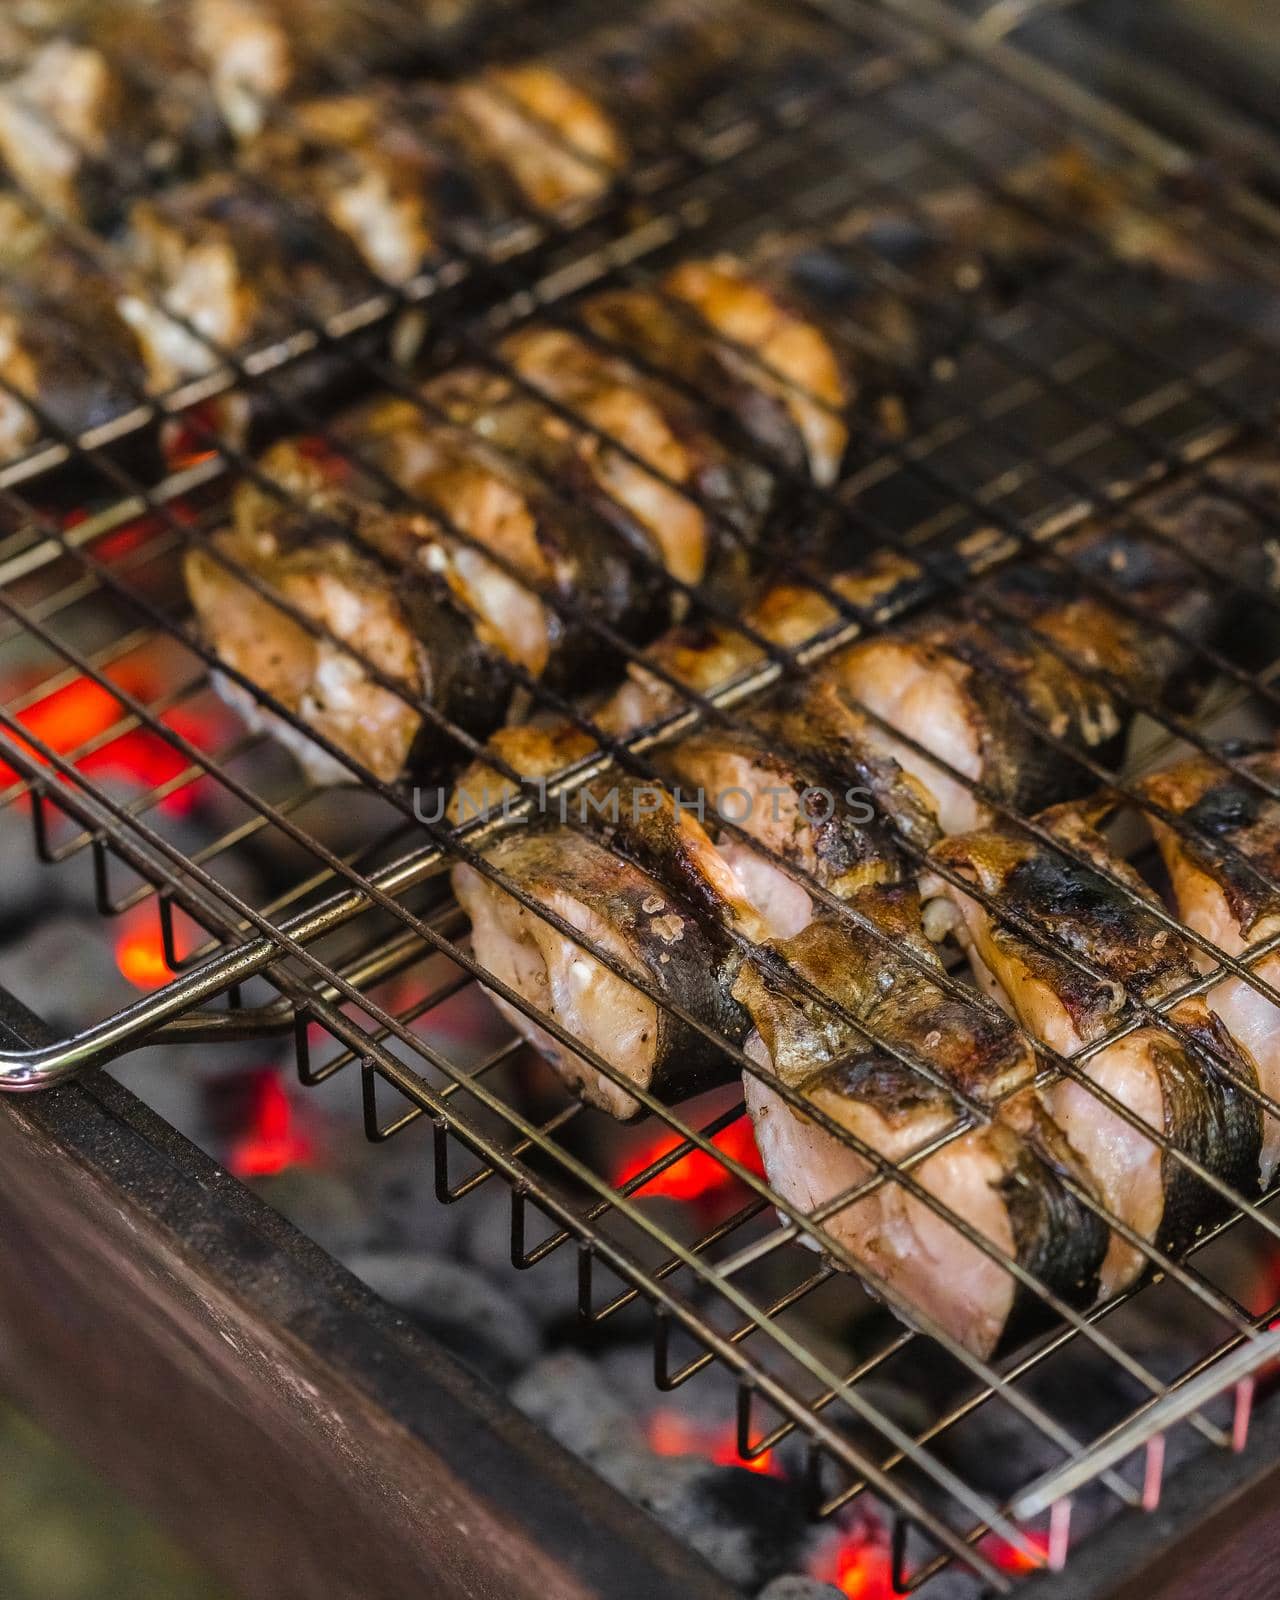 Fried trout fish on charcoal bbq grill by Syvanych